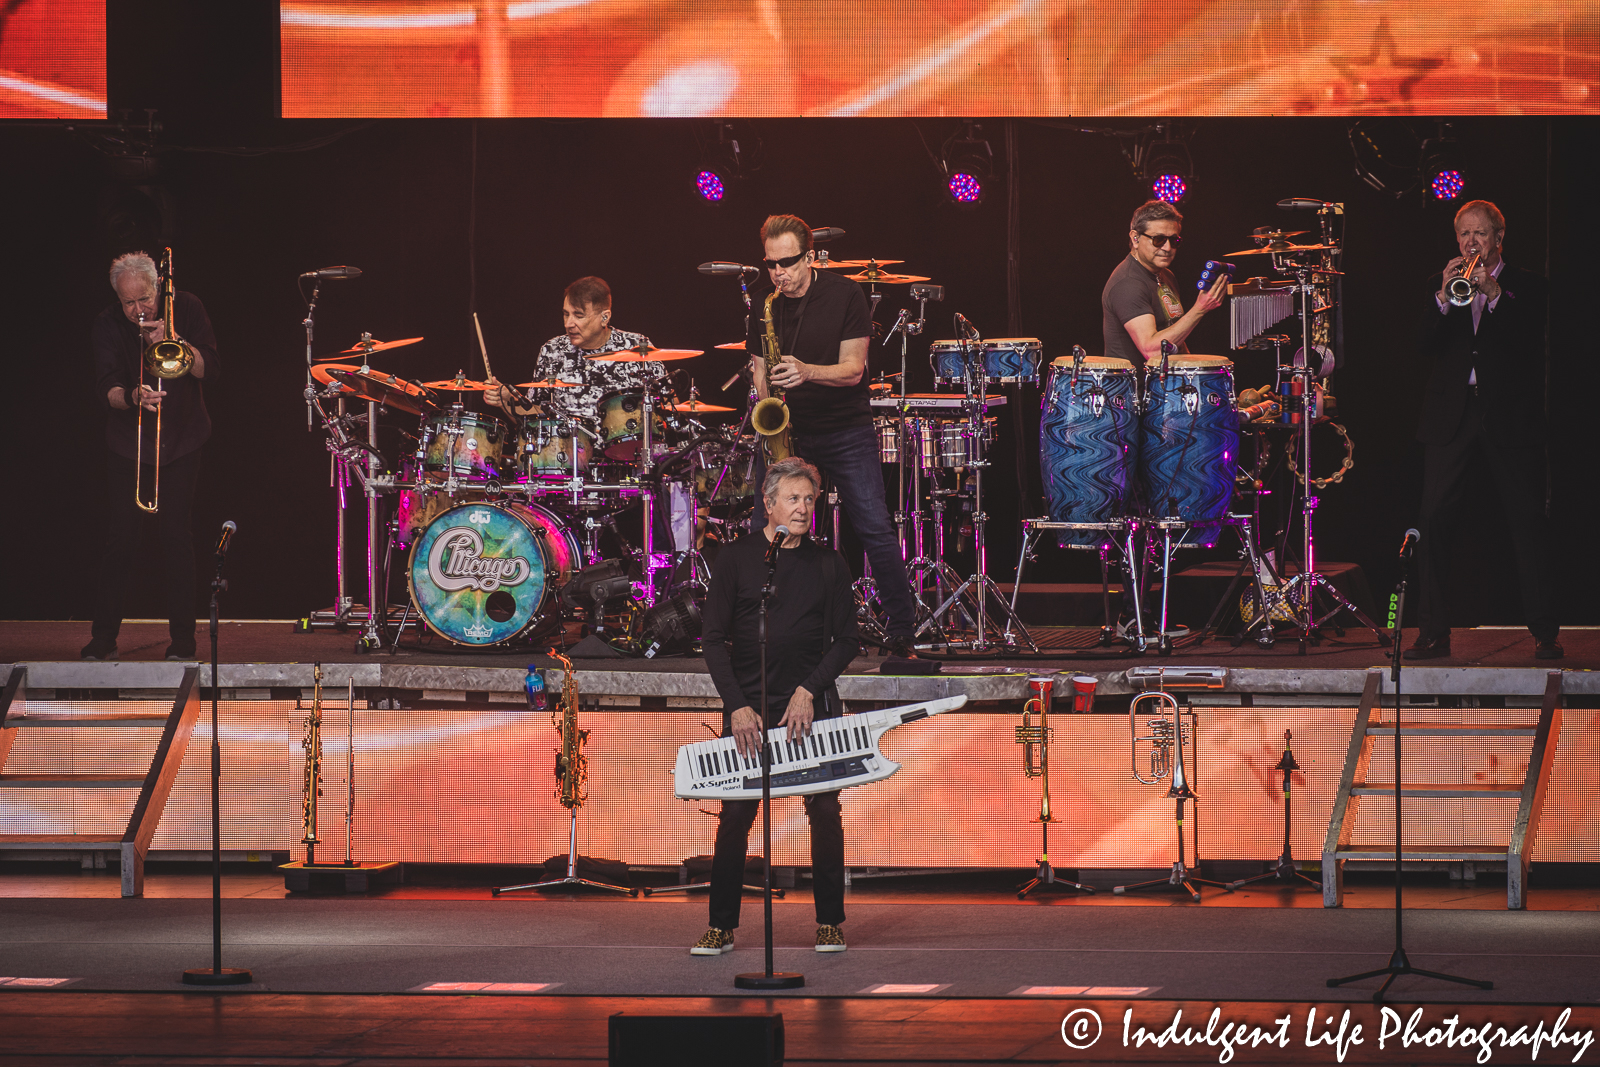 Soft rock band Chicago opening its concert with Robert Lamm playing the keytar at Starlight Theatre in Kansas City, MO on May 26, 2023.